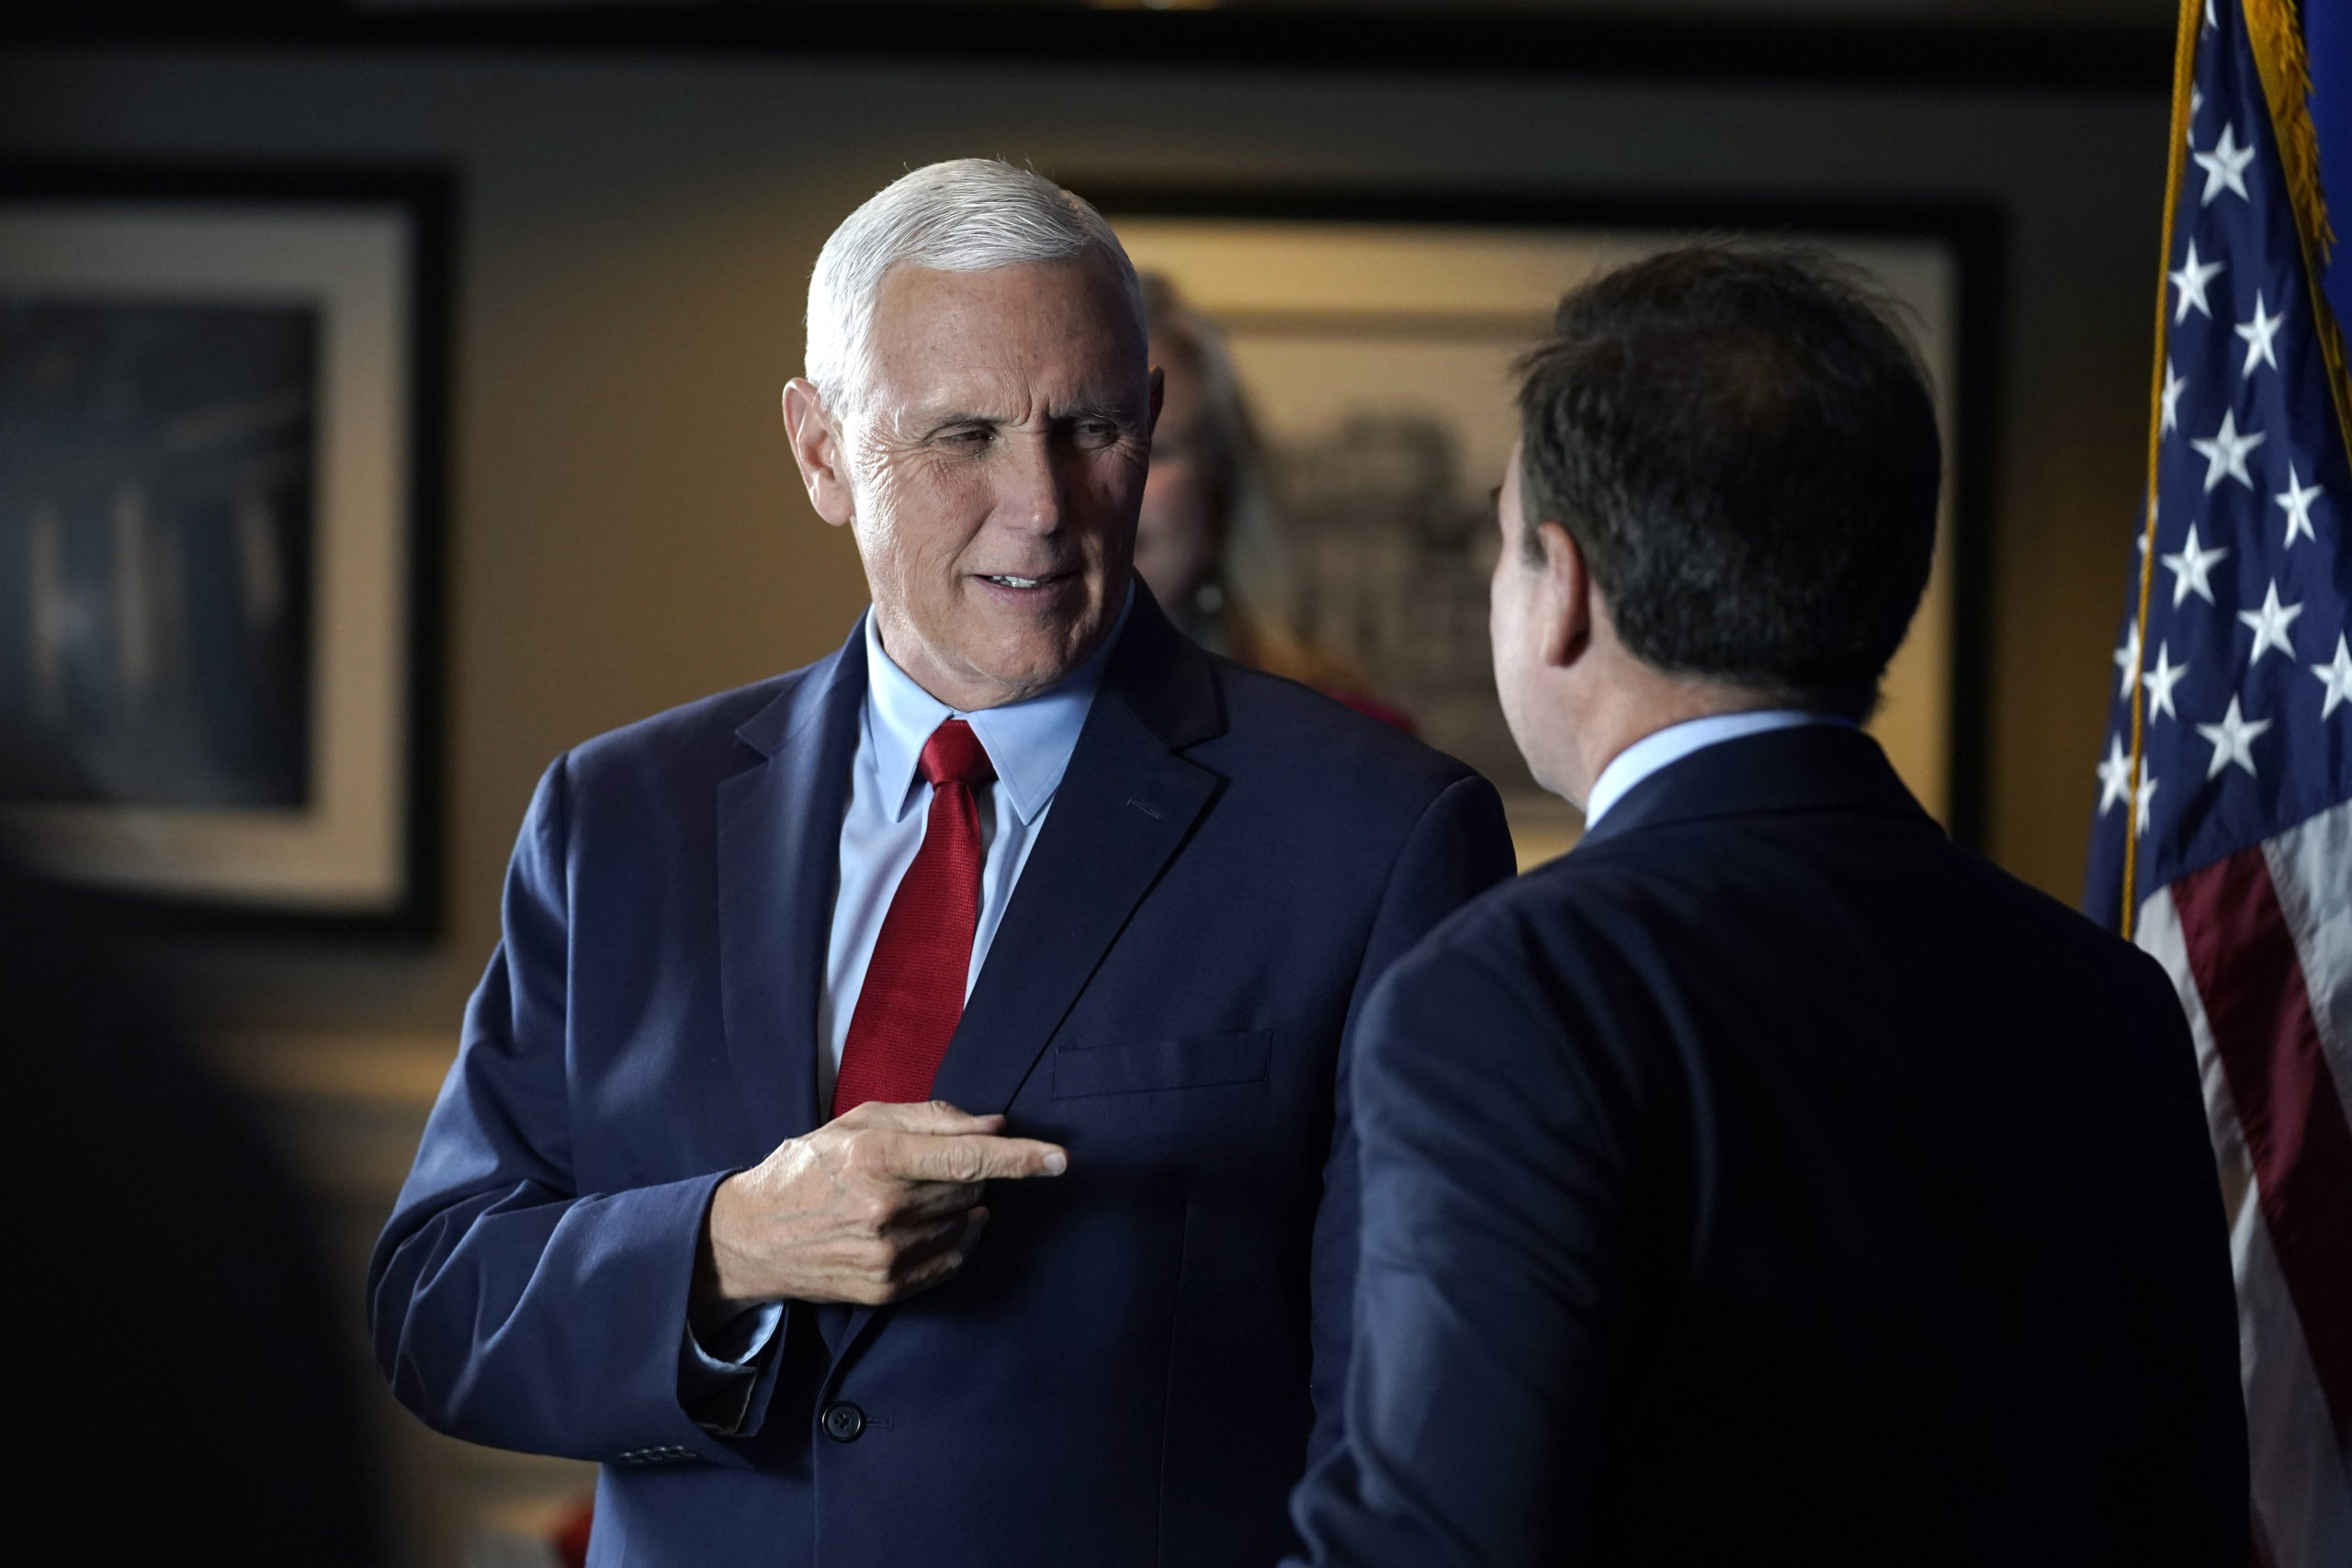 Former Vice President Mike Pence greets people while signing copies of his book "So Help Me God" before the start of a GOP fundraising dinner on Thursday in Keene, New Hampshire.